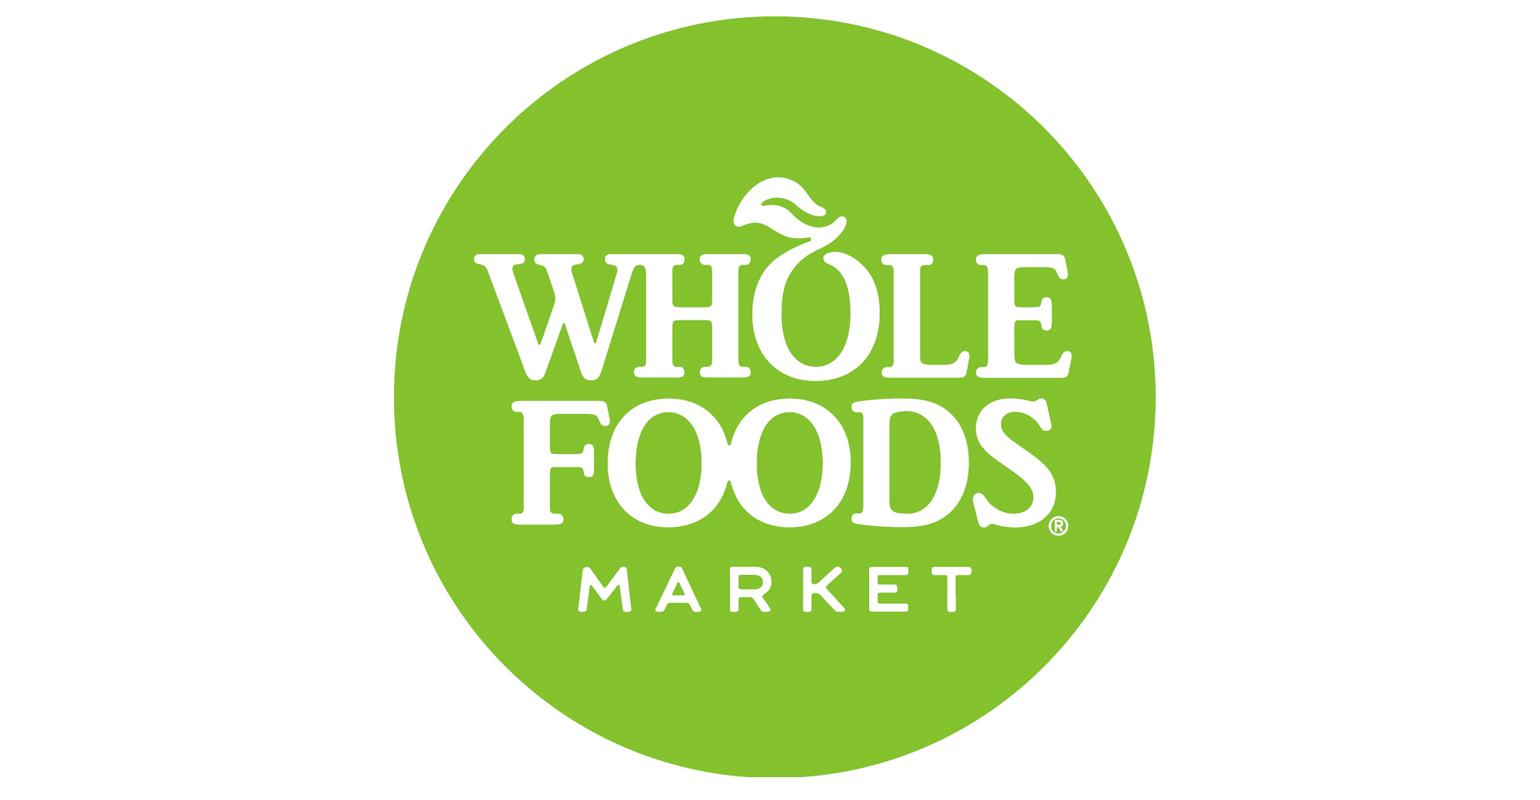 Whole Foods faces Canadian challenges, opportunities